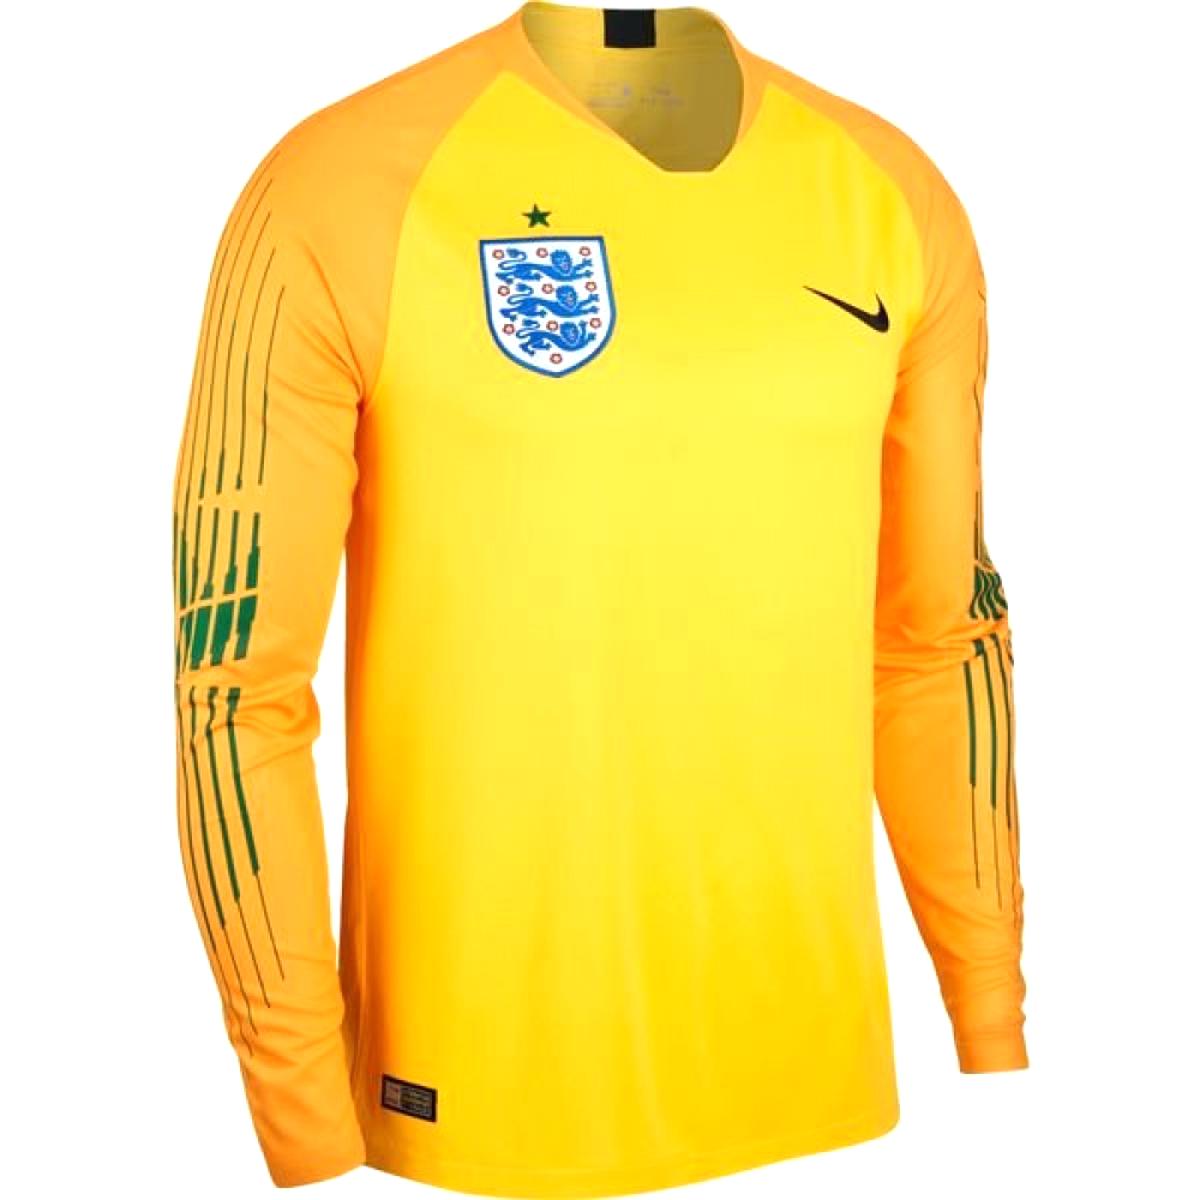 England Goalkeeper Shirt for sale in UK | 69 used England Goalkeeper Shirts